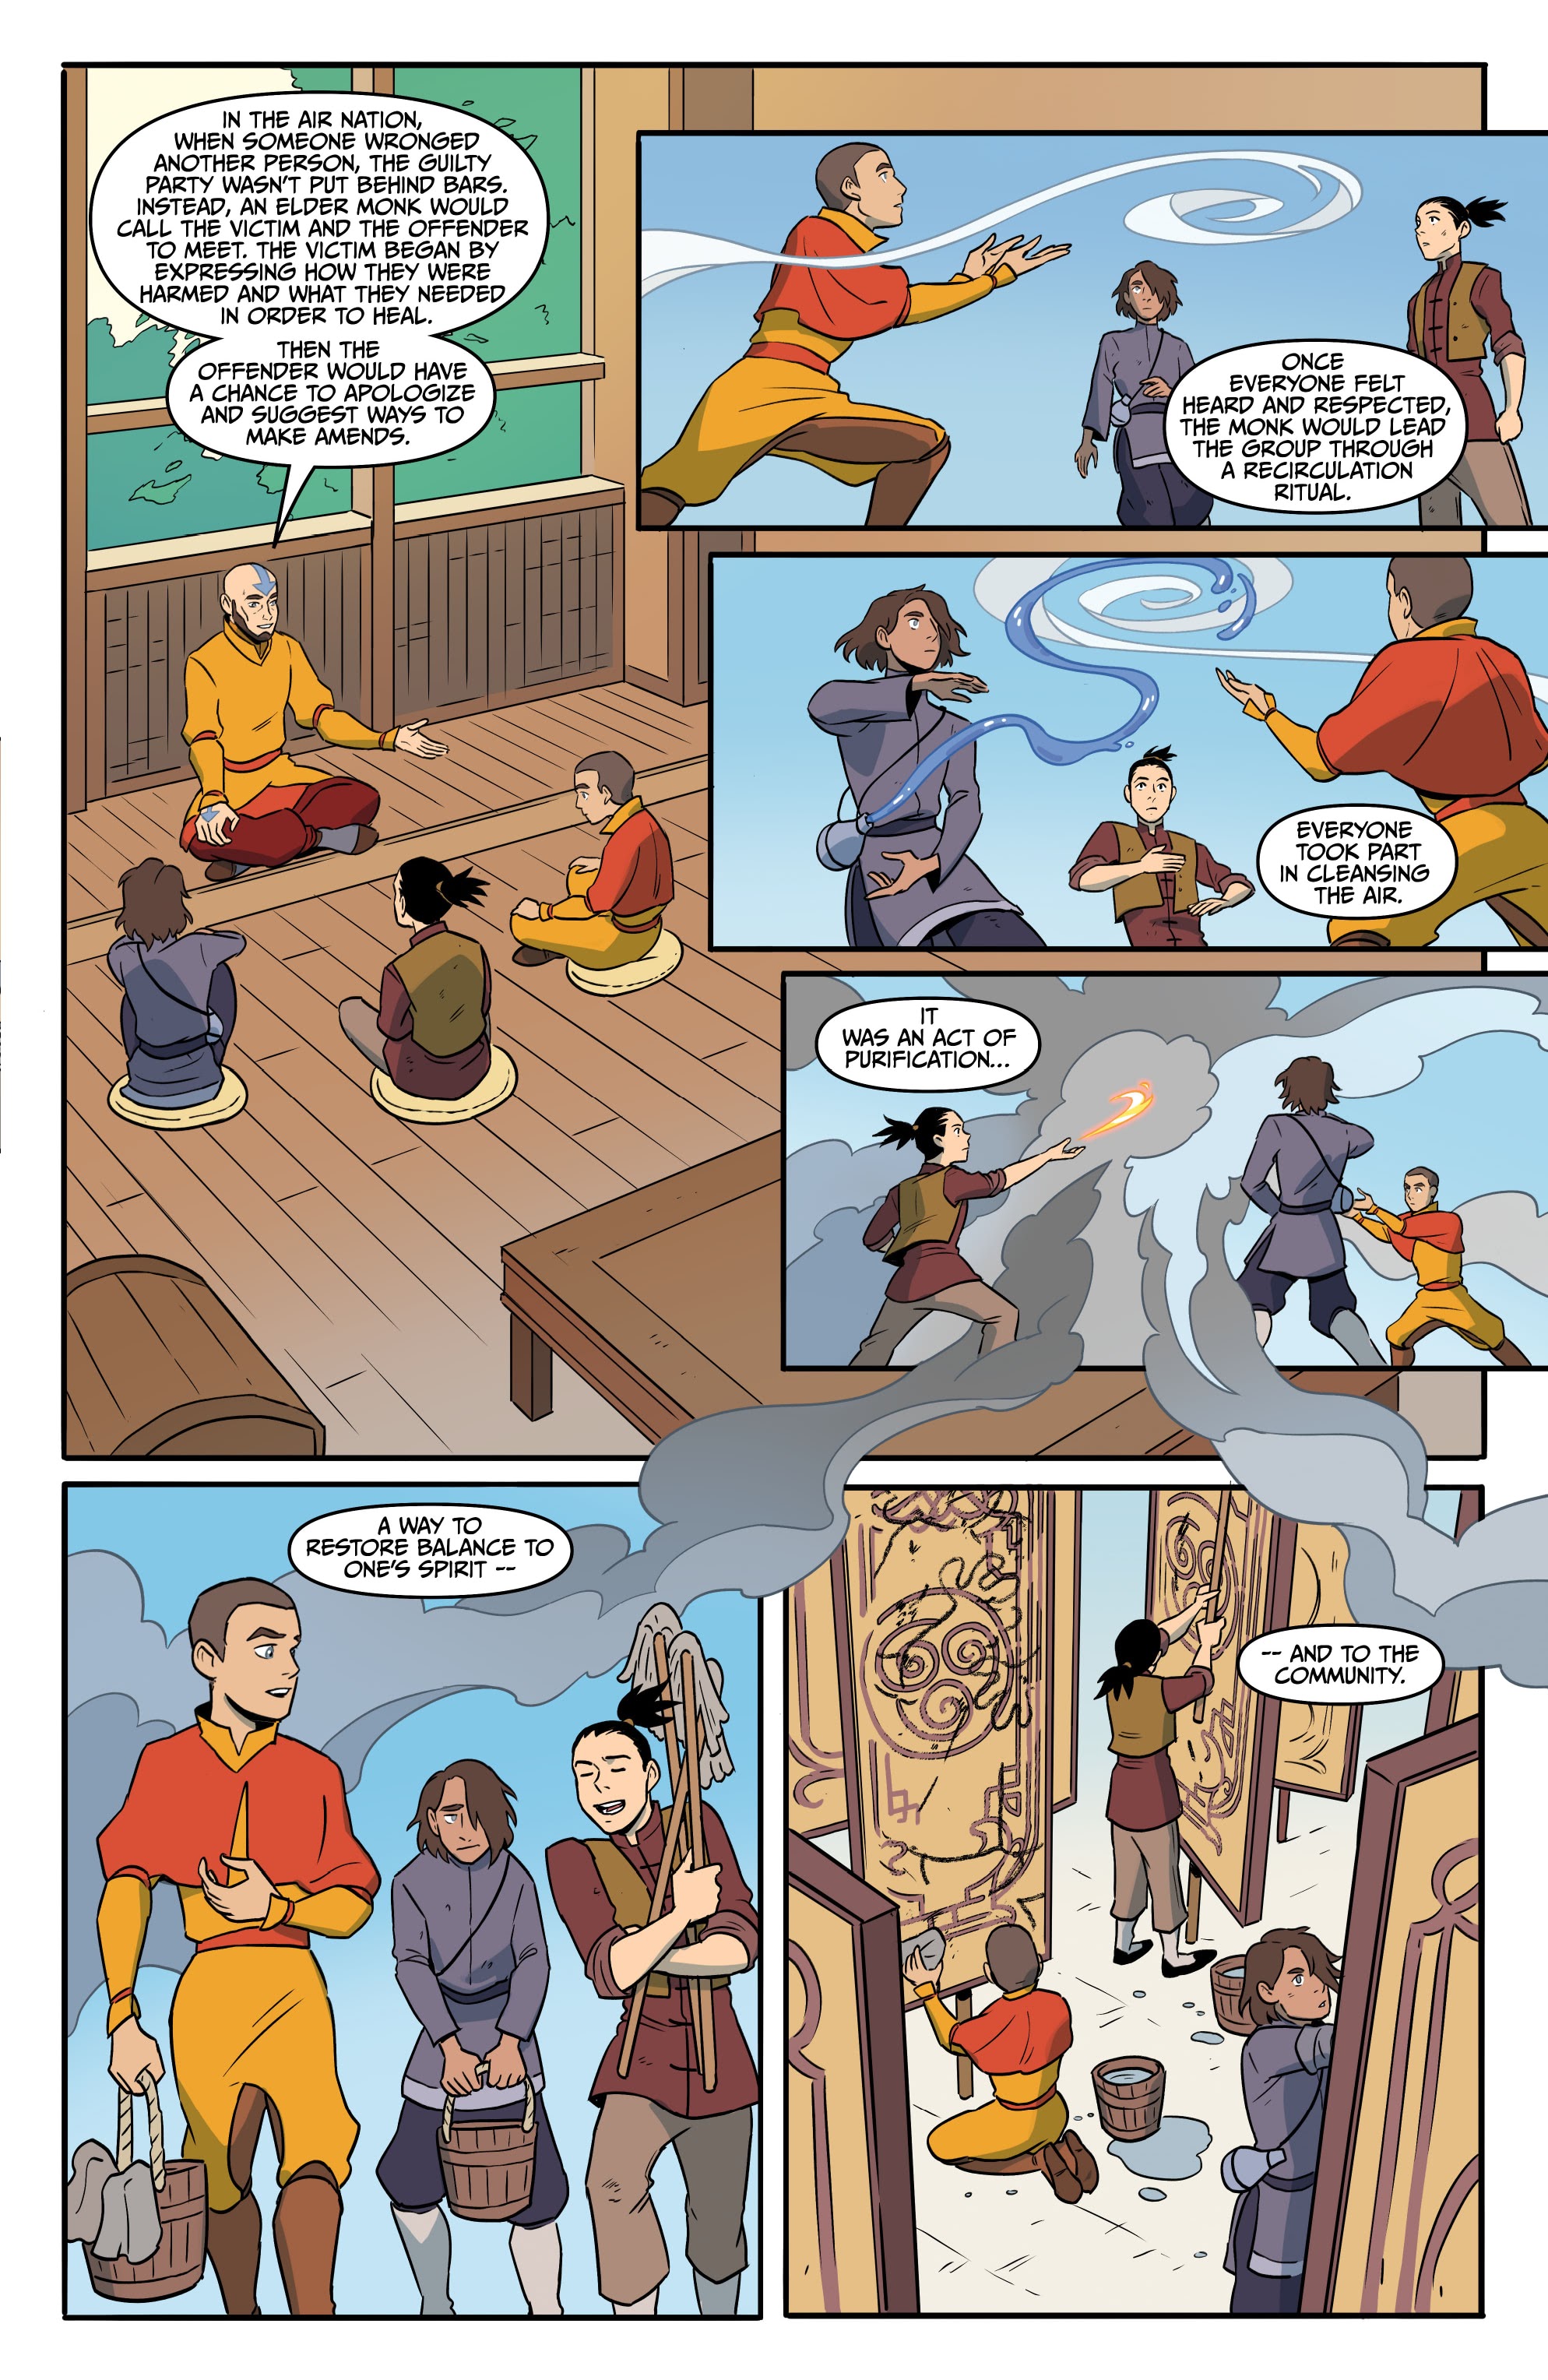 Read online Free Comic Book Day 2021 comic -  Issue # Avatar - The Last Airbender - The Legend of Korra - 11